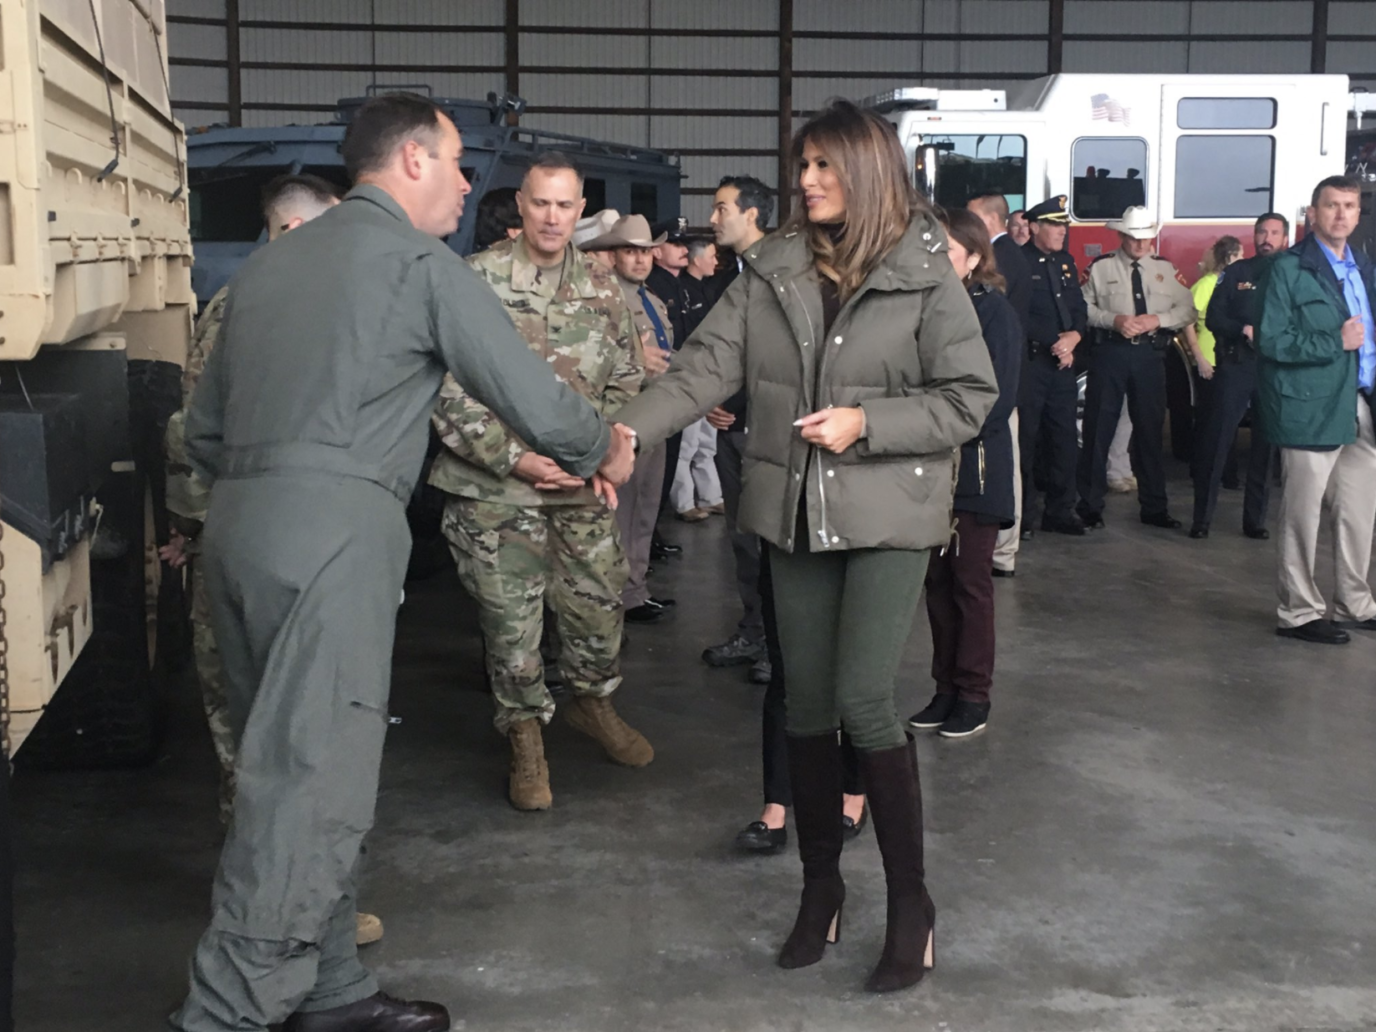 Melania Sent An Amazing Message To Her Haters With The Shoes She Wore